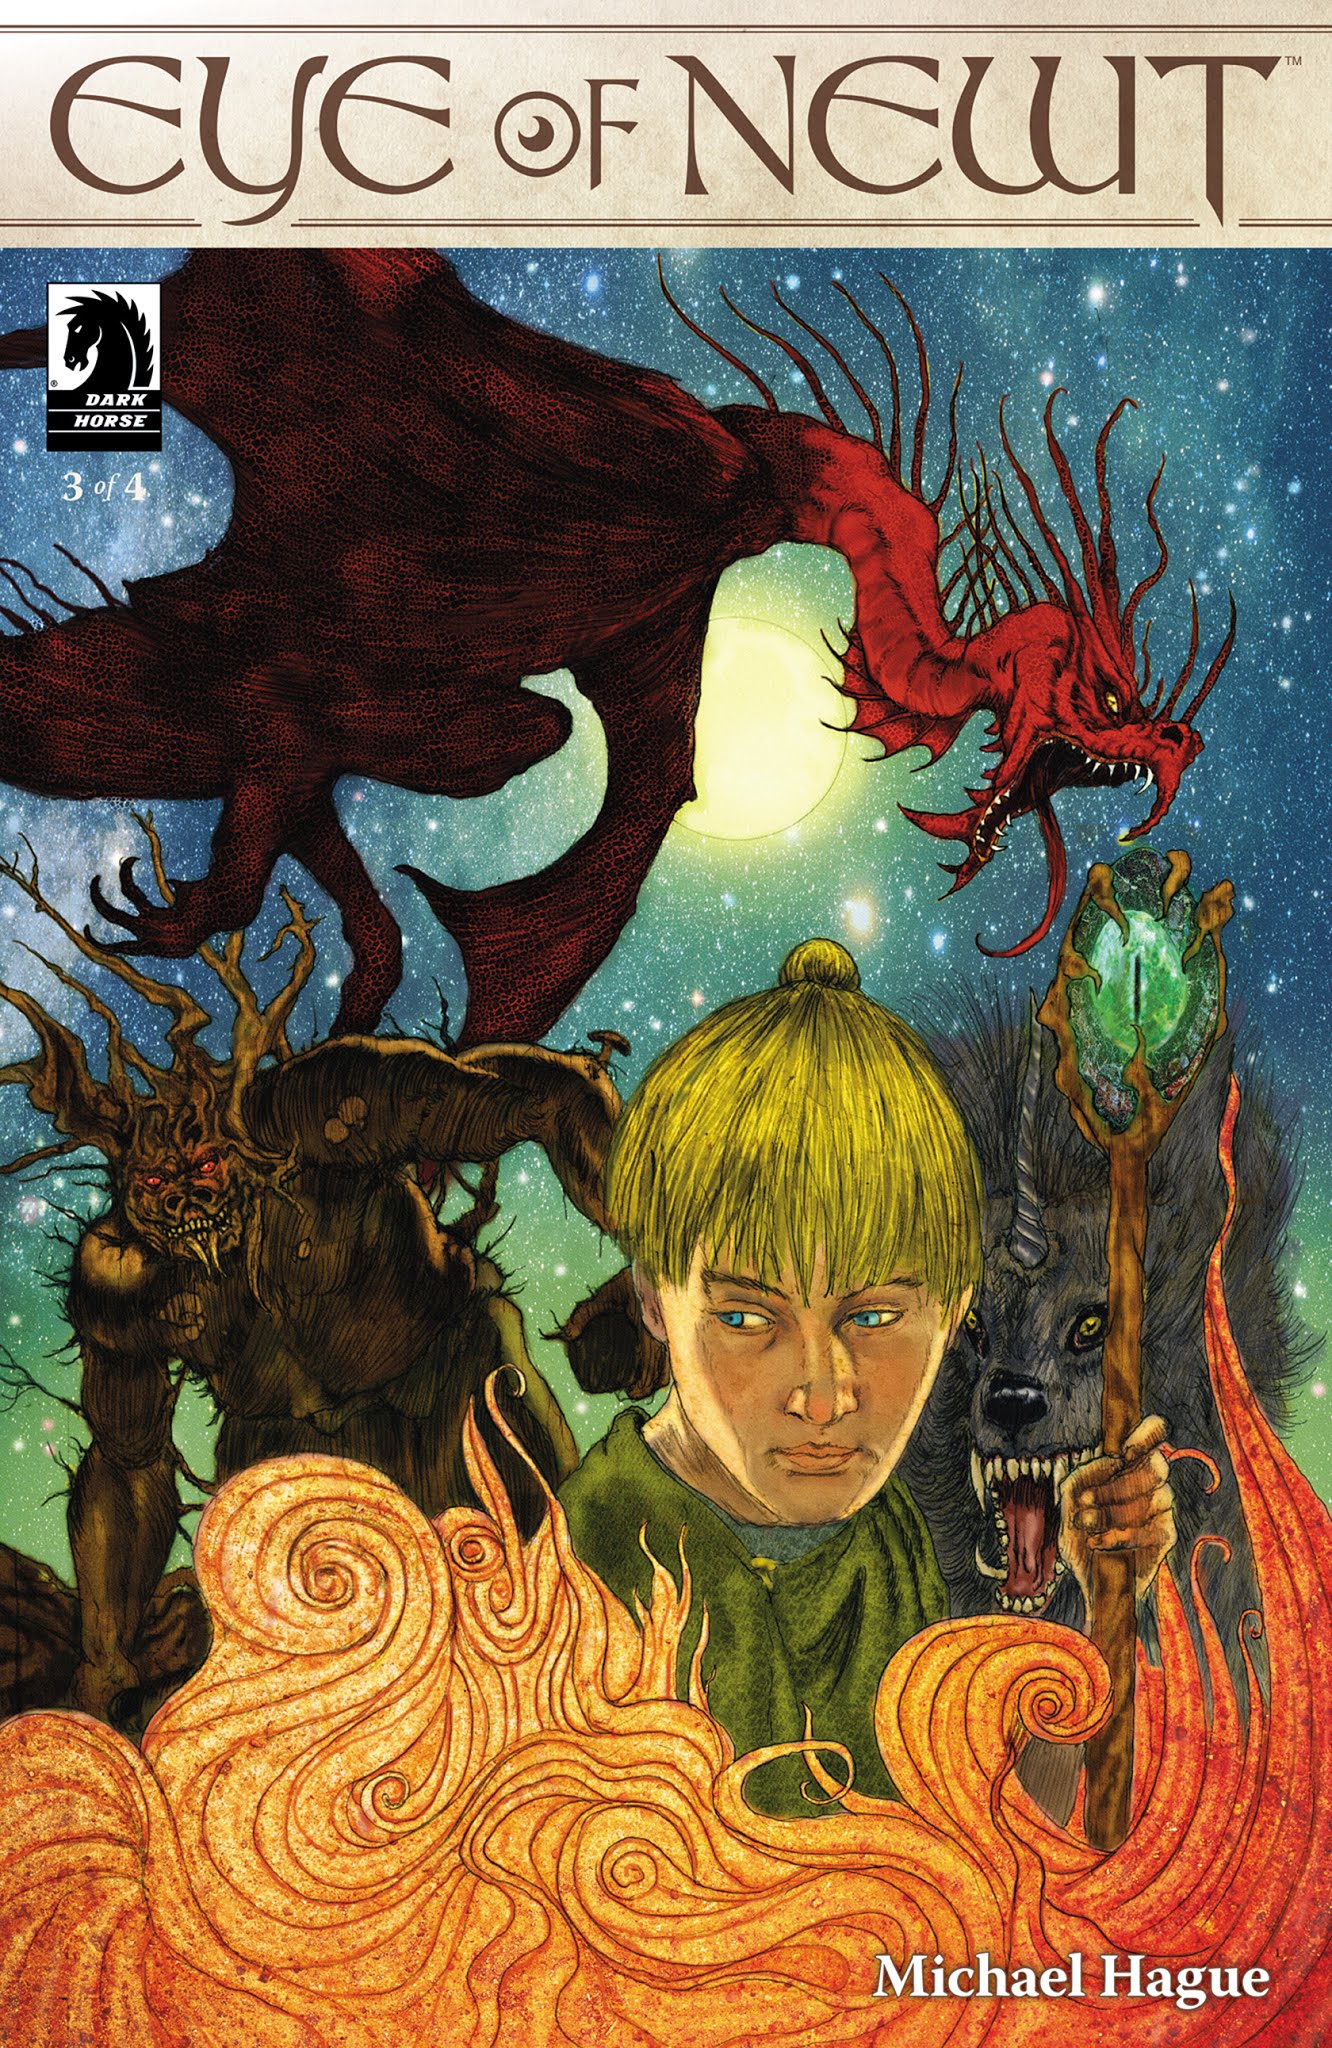 Read online Eye of Newt comic -  Issue #3 - 1